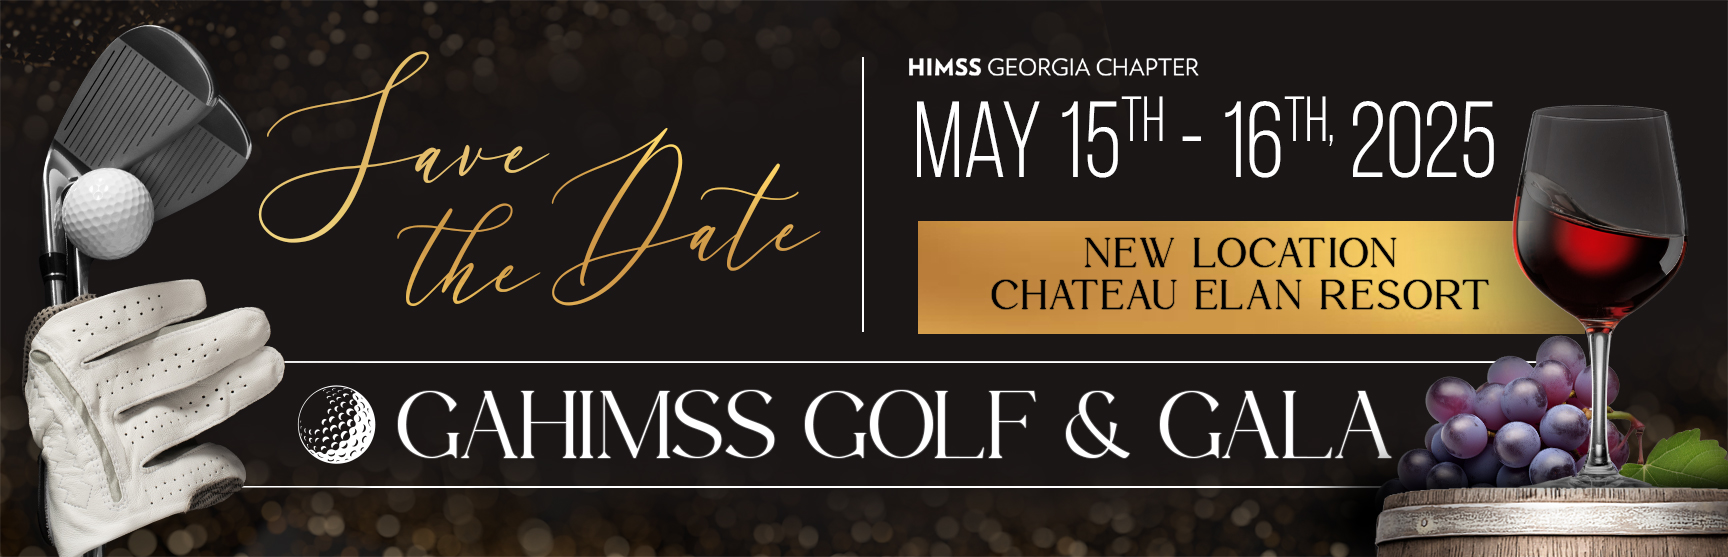 Golf and Gala banner